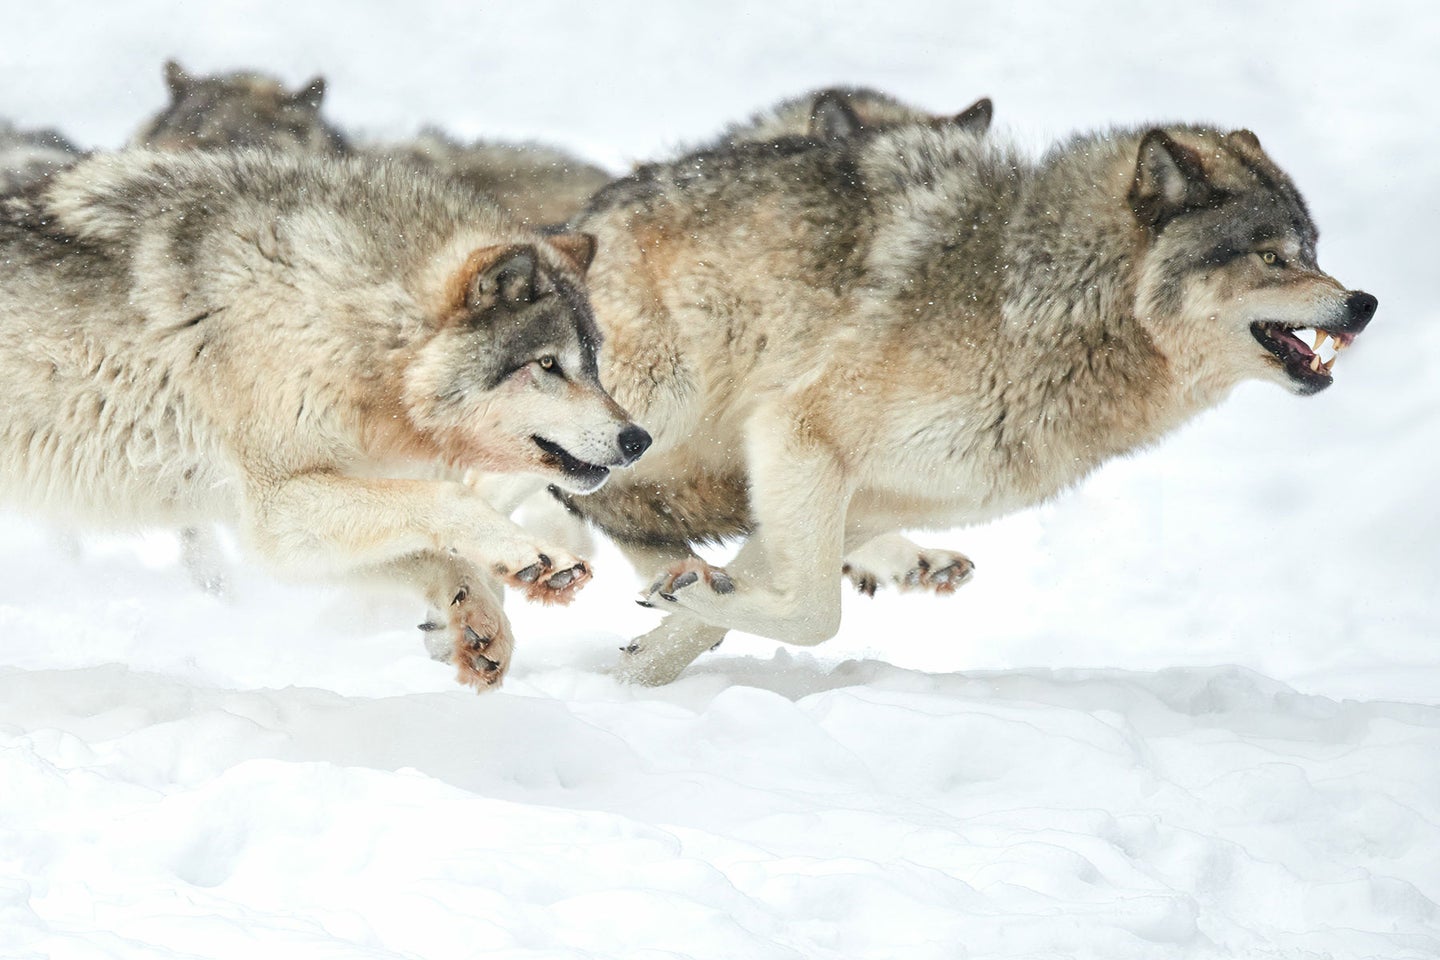 A close up of a wolf pack running through snow.